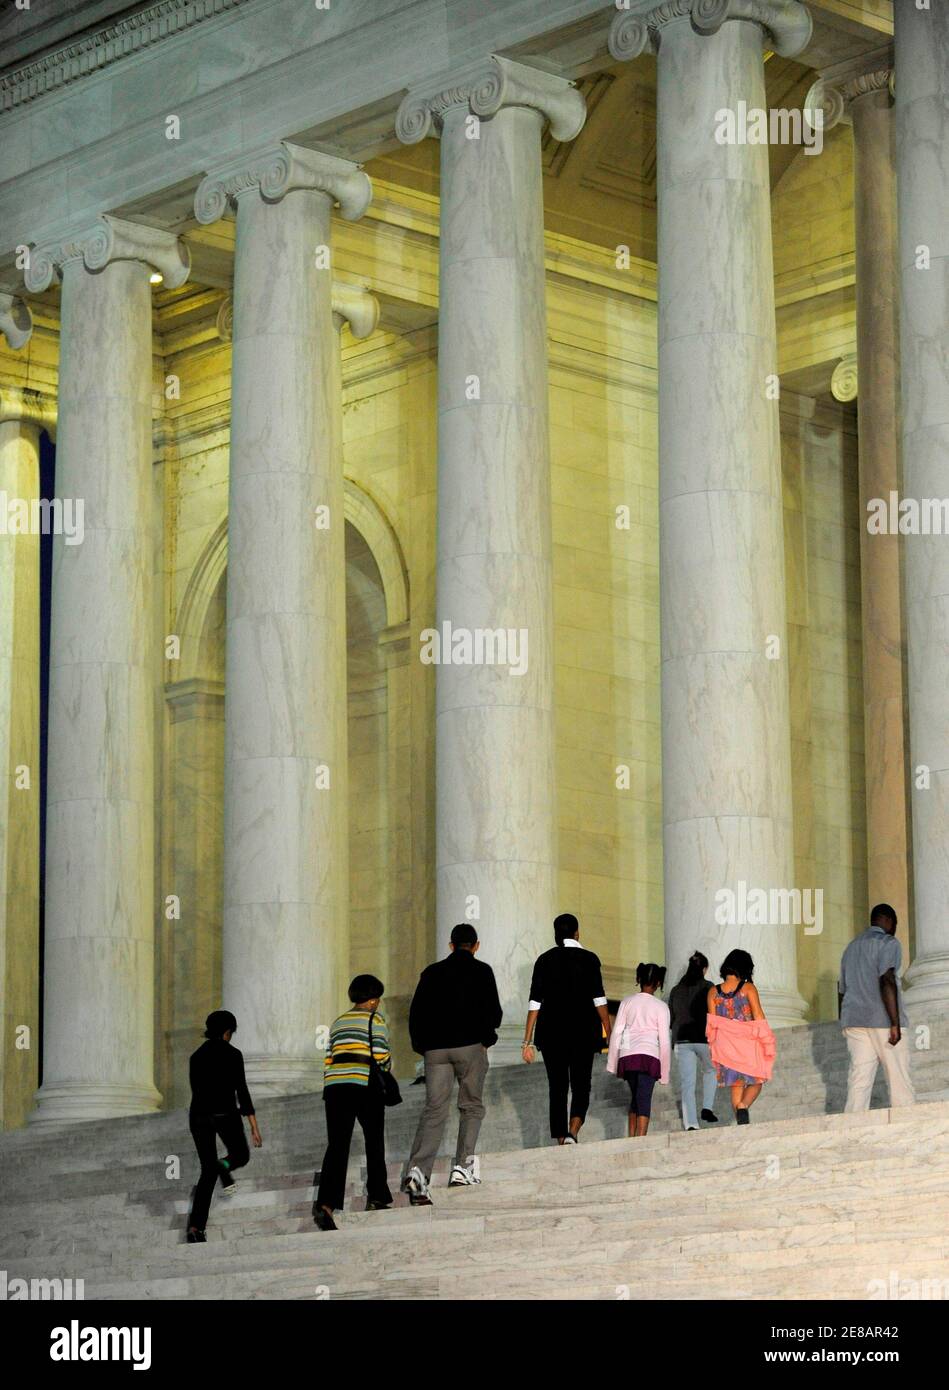 U.S. President Barack Obama (3rd L) walks with family members up the steps for a night time visit to the Jefferson Memorial on the Tidal Basin in Washington September 27, 2009. First lady Michelle Obama (5th R) walks with daughter Sasha (4th R) and niece Suhaila Soetoro-Ng (2nd R) as Michelle's mother Marian Robinson (2nd L) and daughter Malia (L) follow. Secret Service agents are at (R) and (3rd R).          REUTERS/Mike Theiler (UNITED STATES POLITICS) Stock Photo